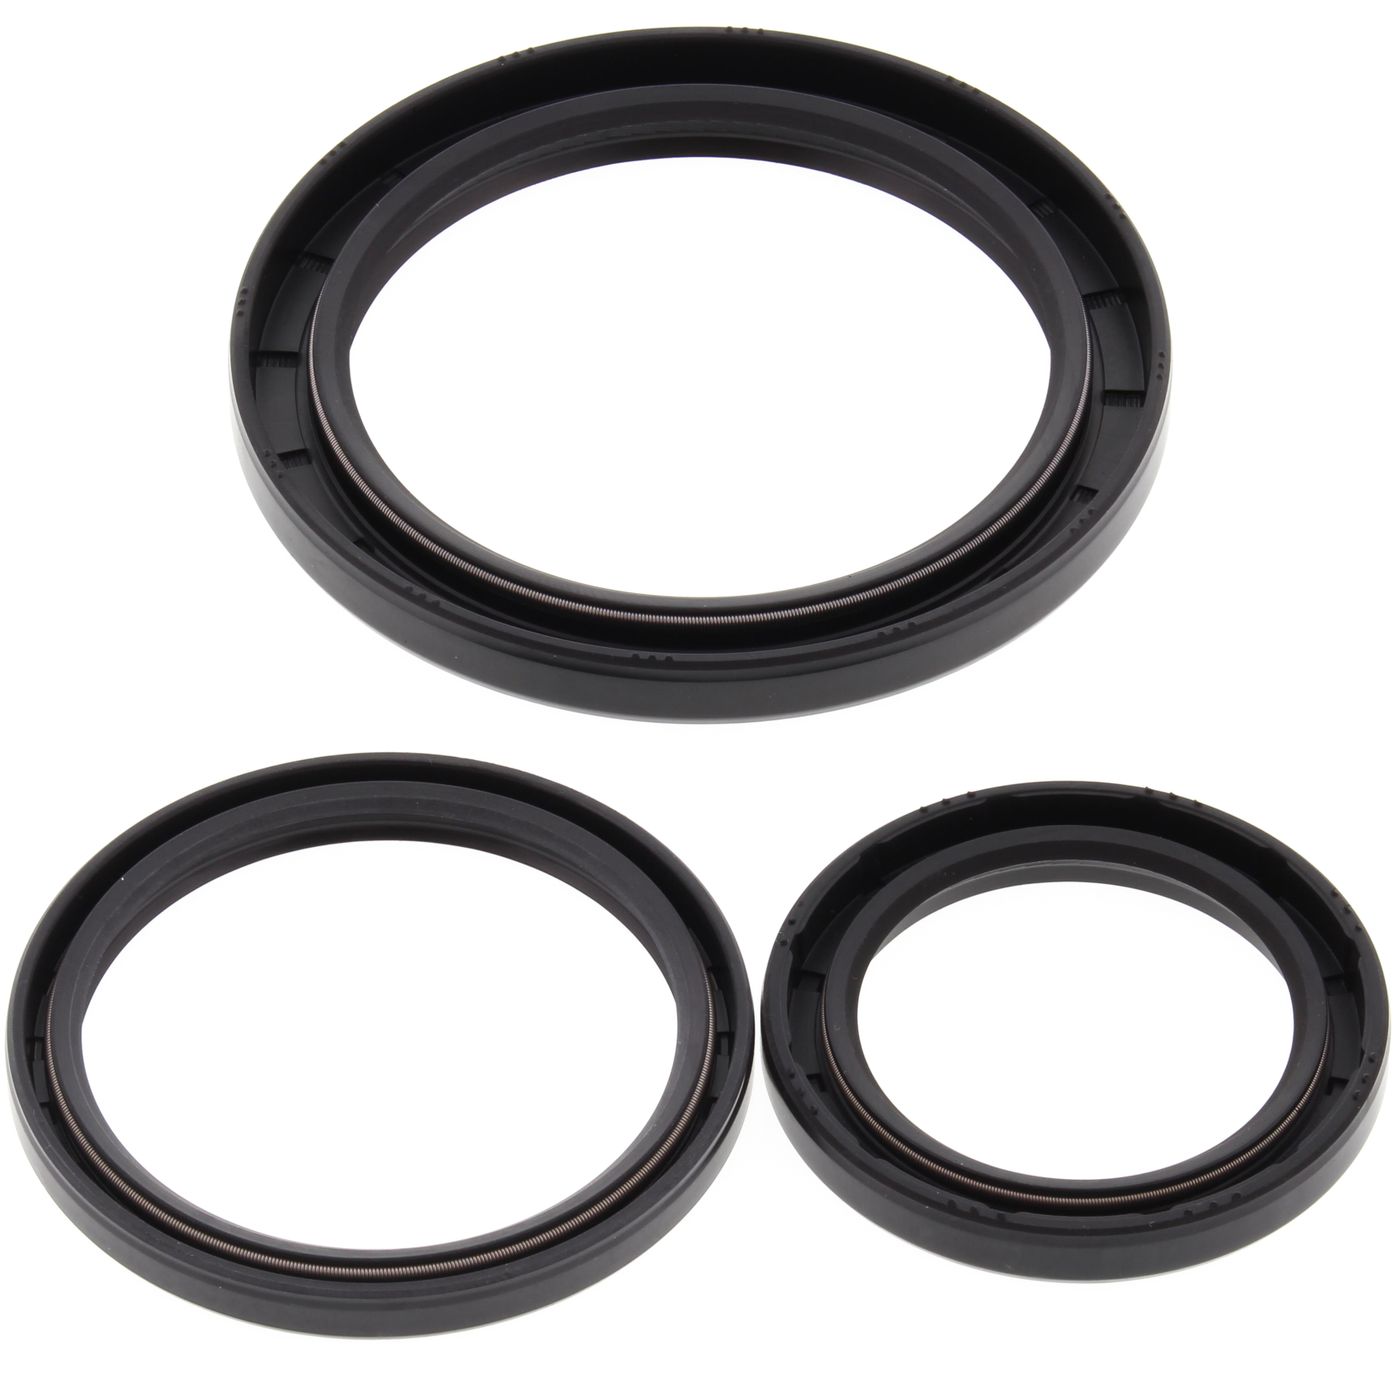 Wrp Diff Seal Kits - WRP252033-5 image